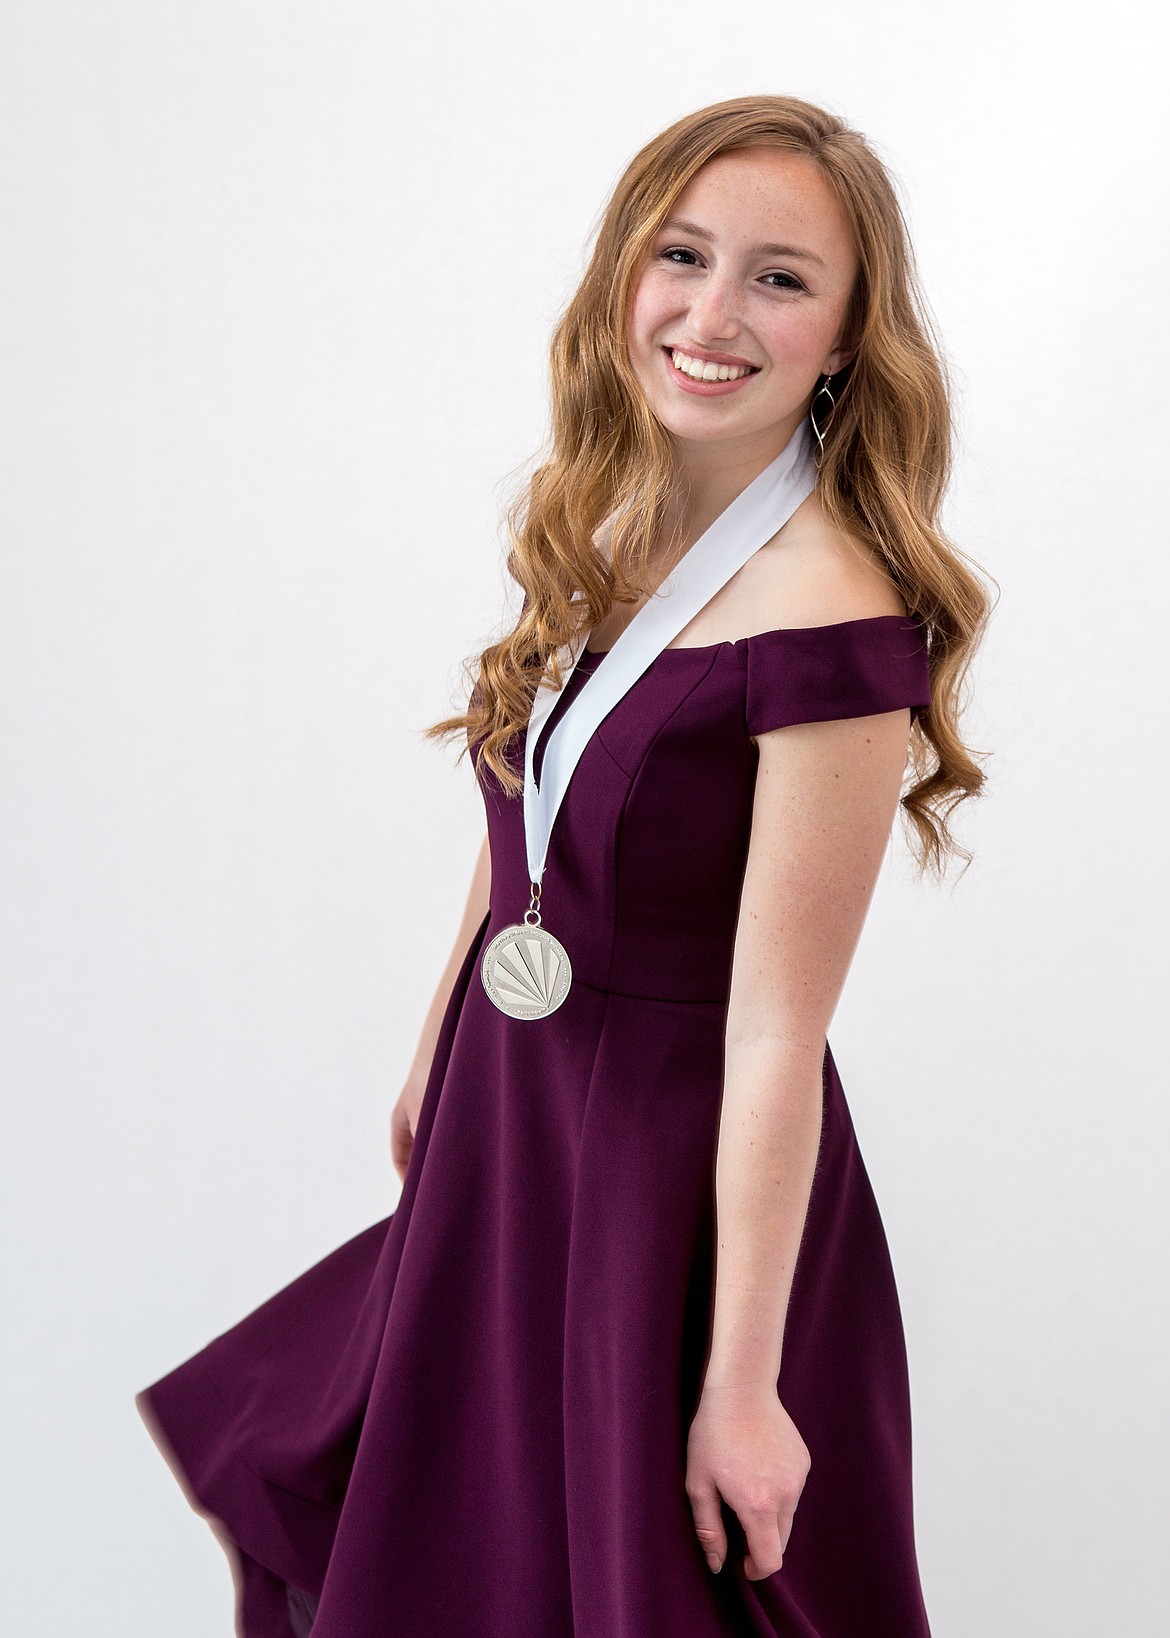 Camille Neuder will be taking part in the Distinguished Young Women National Finals later this month.